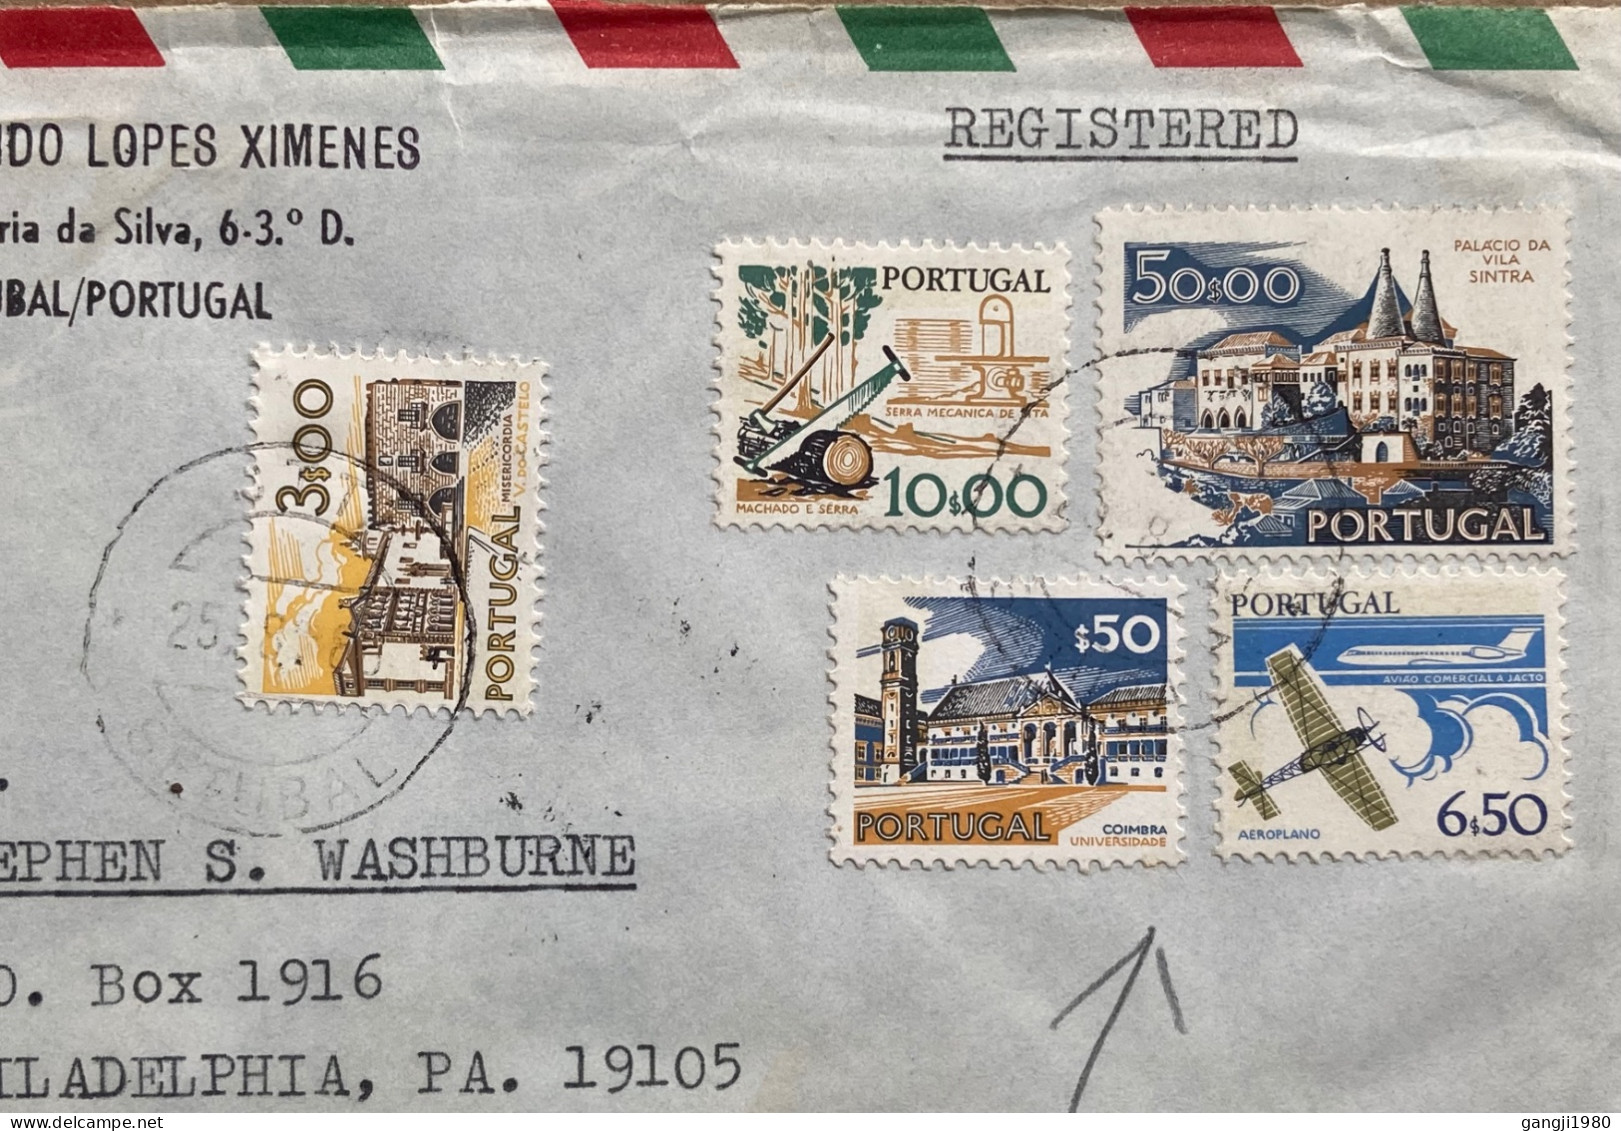 PORTUGAL 1980, REGISTER COVER, USED TO USA, SETUBAL CITY, 5 DIFF STAMP, SAN AXE, SINATRA VILLA BUILDING, HERITAGE, AEROP - Covers & Documents